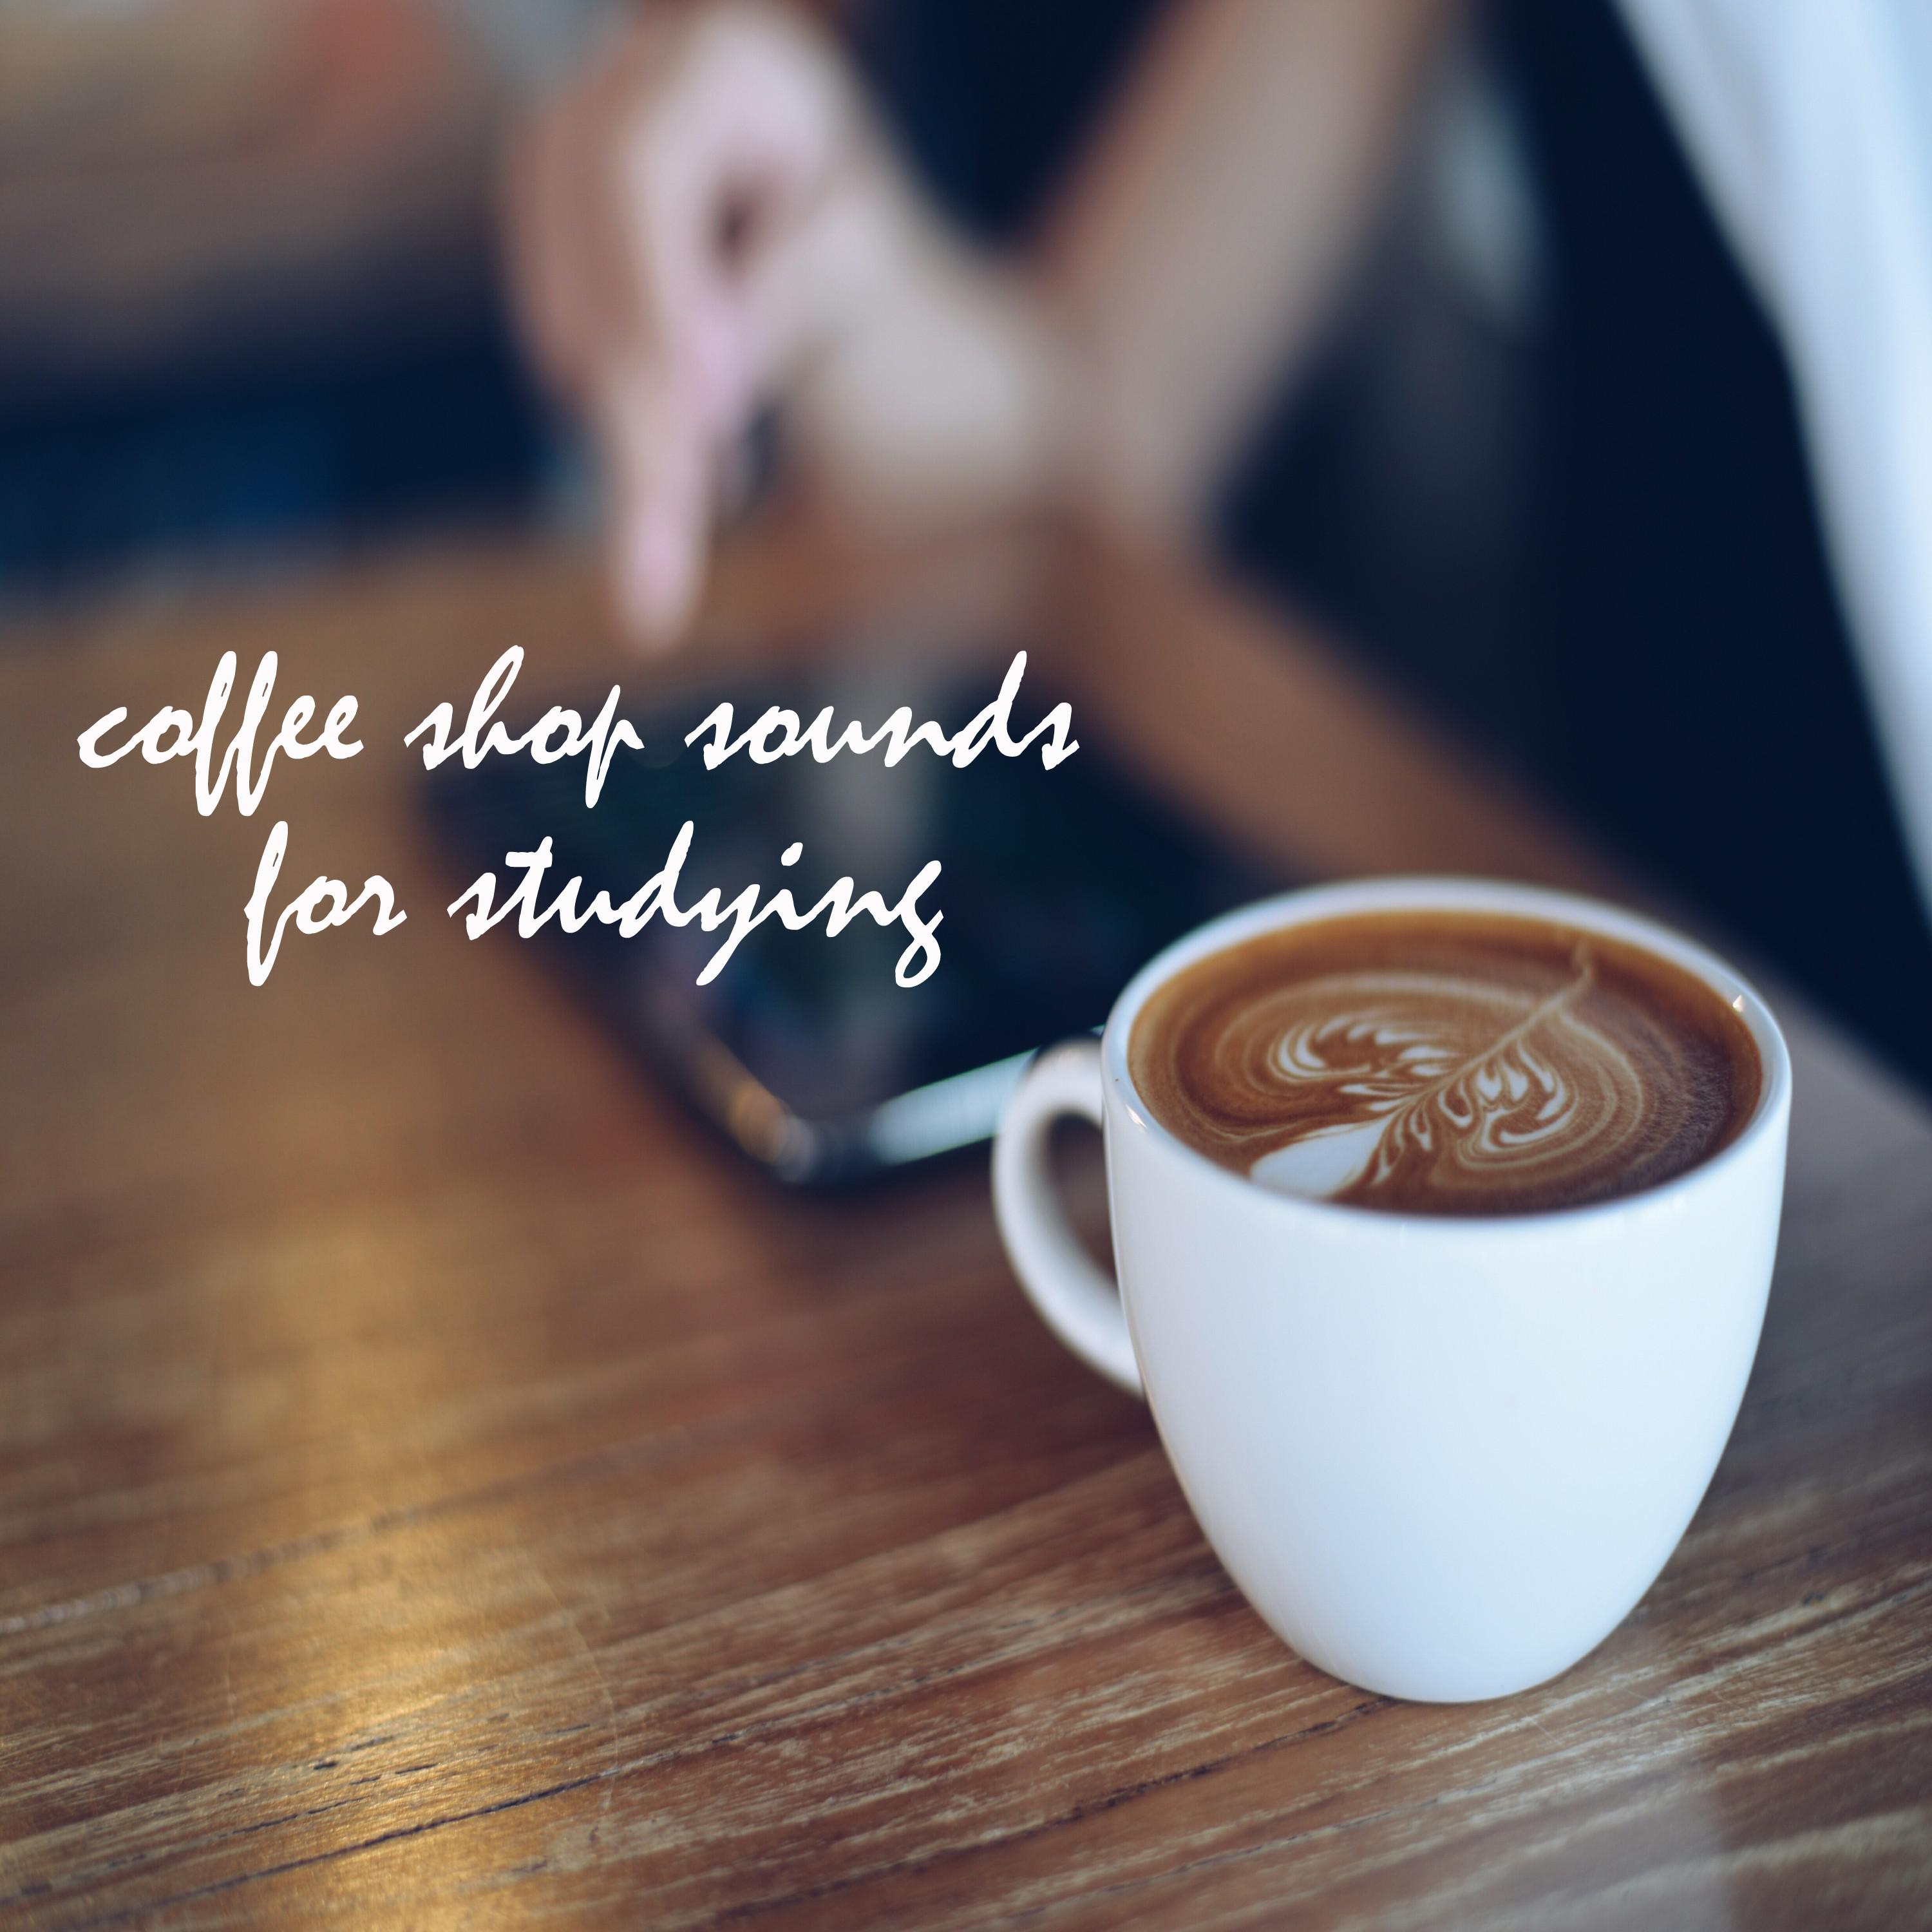 Coffee Shop Sounds for Studying and Working, Pt. 55